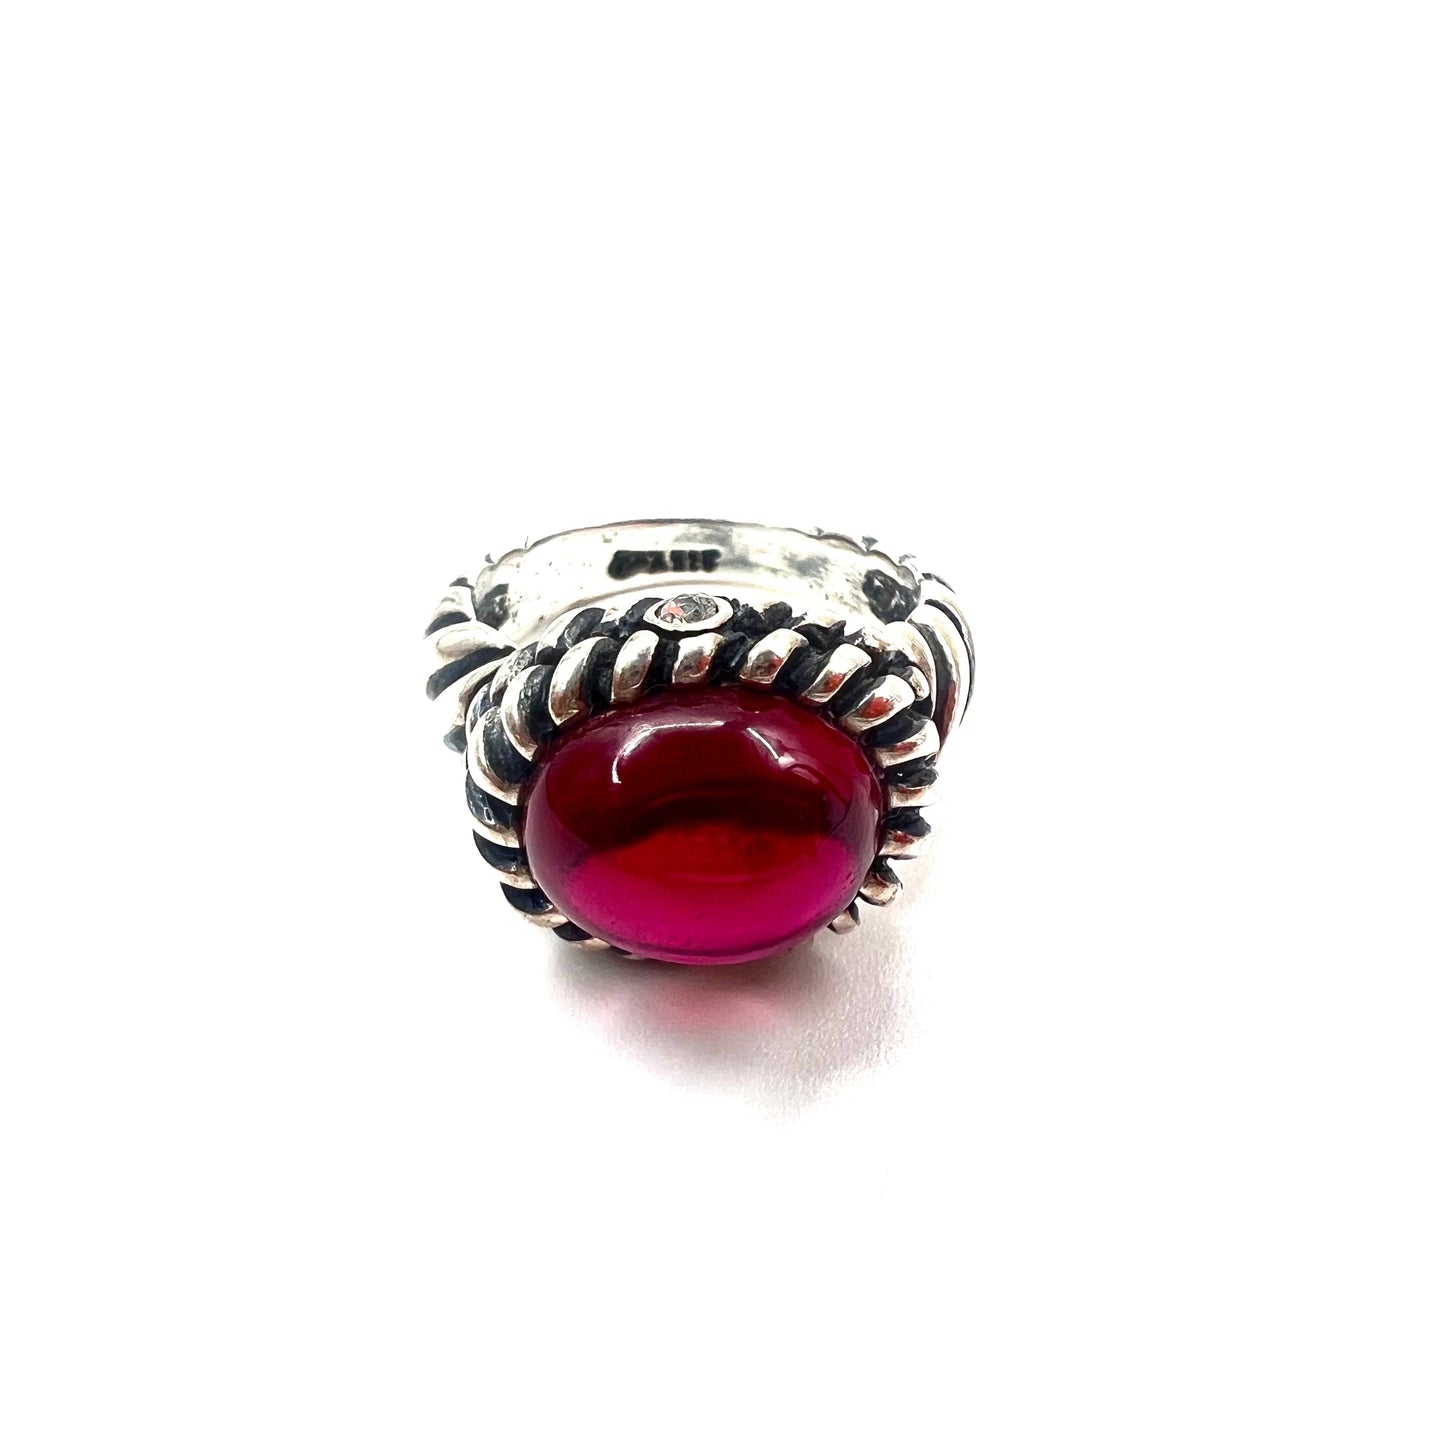 Vintage Silver Ring Silver Color Stone Ring Ring No. 12 Red Silver ...